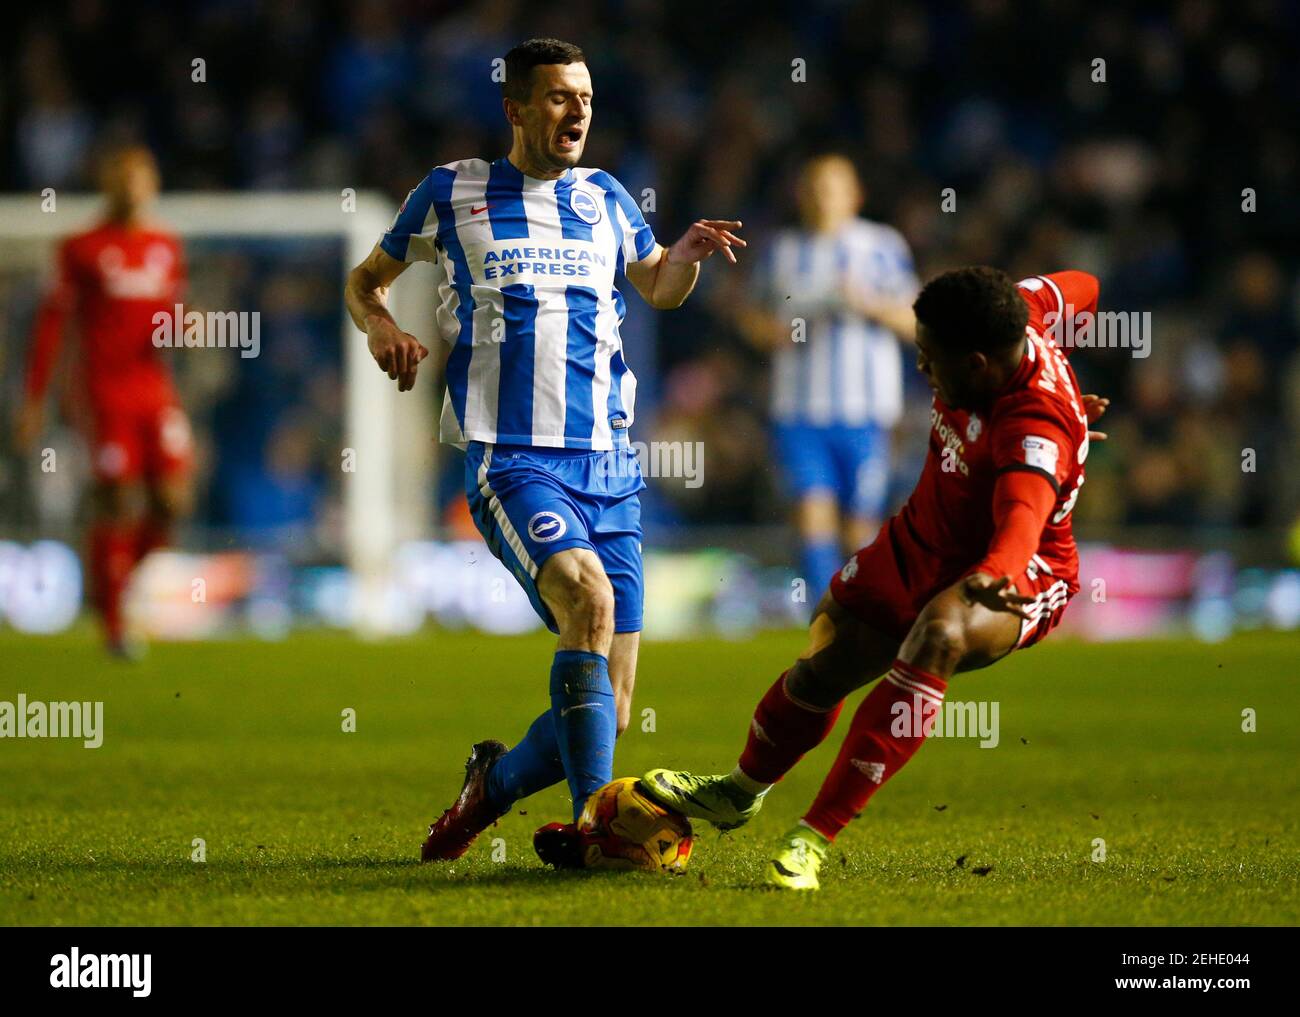 Britain Football Soccer - Brighton & Hove Albion v Cardiff City - Sky Bet Championship - The American Express Community Stadium - 24/1/17 Cardiff City's Kadeem Harris in action with Brighton's Jamie Murphy  Mandatory Credit: Action Images / Peter Cziborra Livepic EDITORIAL USE ONLY. No use with unauthorized audio, video, data, fixture lists, club/league logos or 'live' services. Online in-match use limited to 45 images, no video emulation. No use in betting, games or single club/league/player publications.  Please contact your account representative for further details. Stock Photo